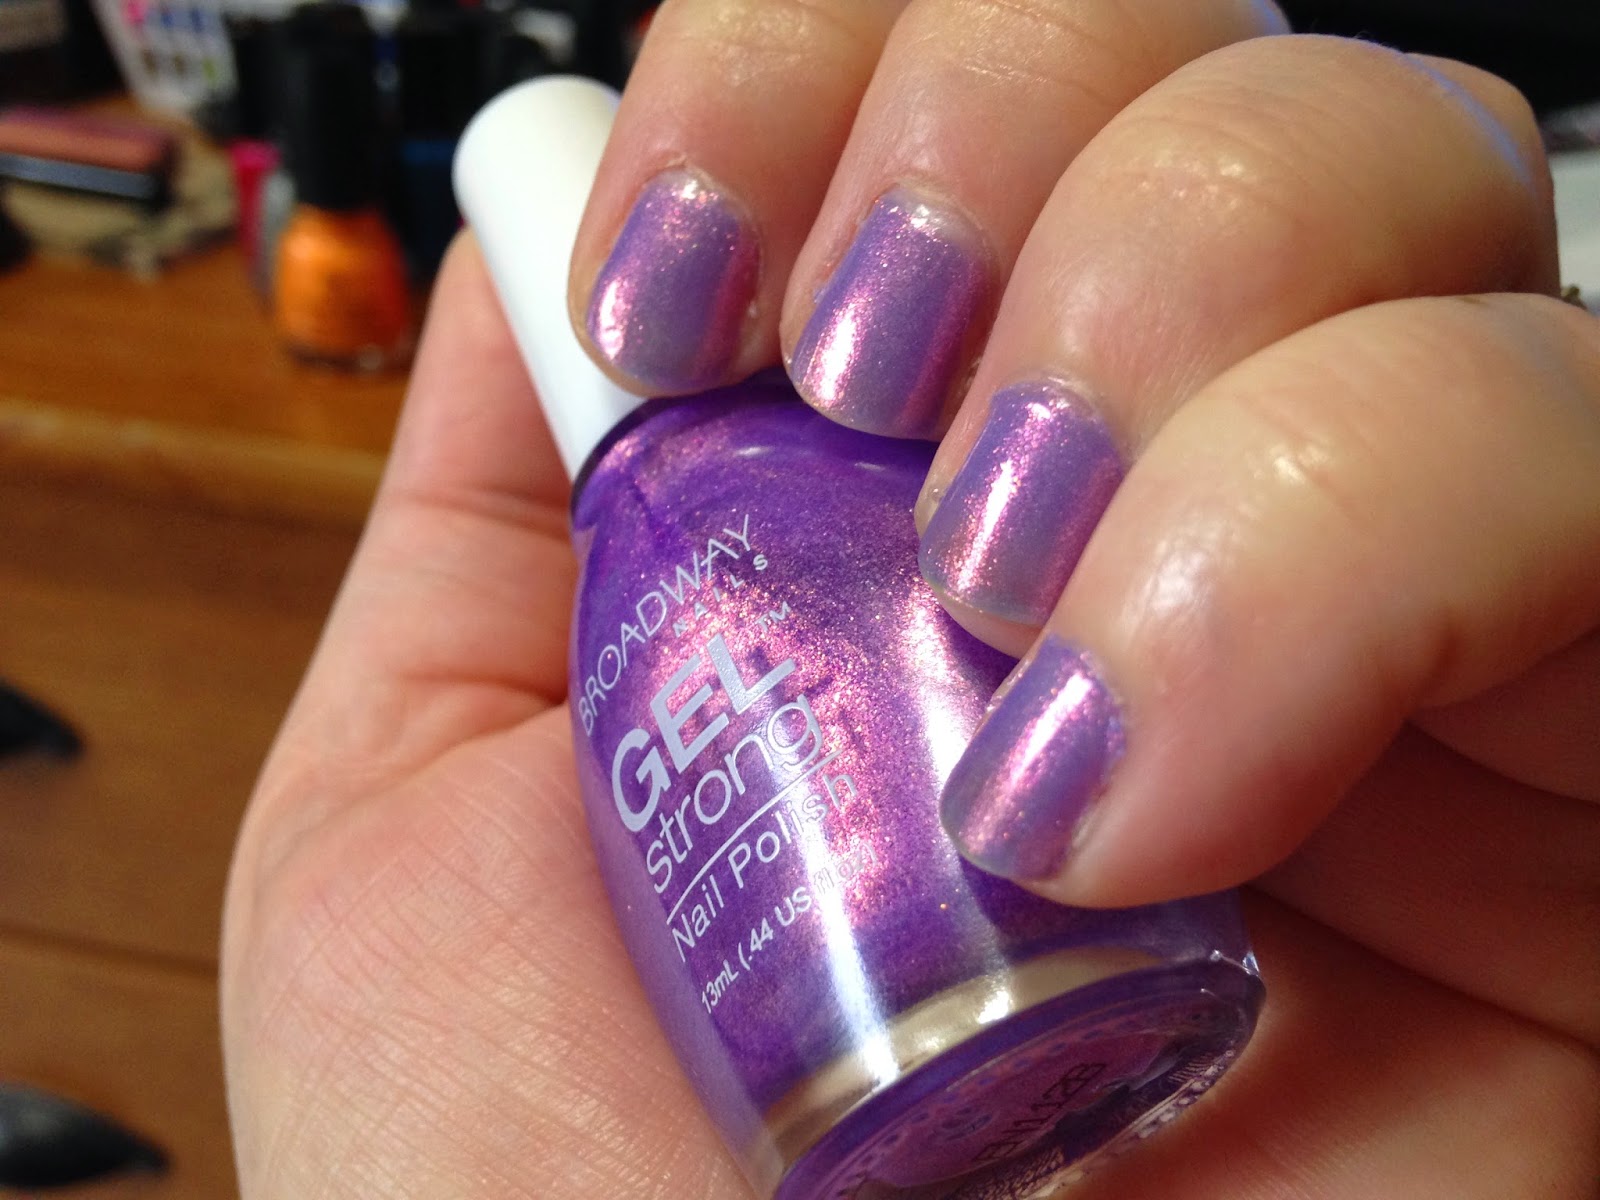 6. Broadway Nails Gel Strong Nail Polish in "Color Me Vibrant" - wide 2